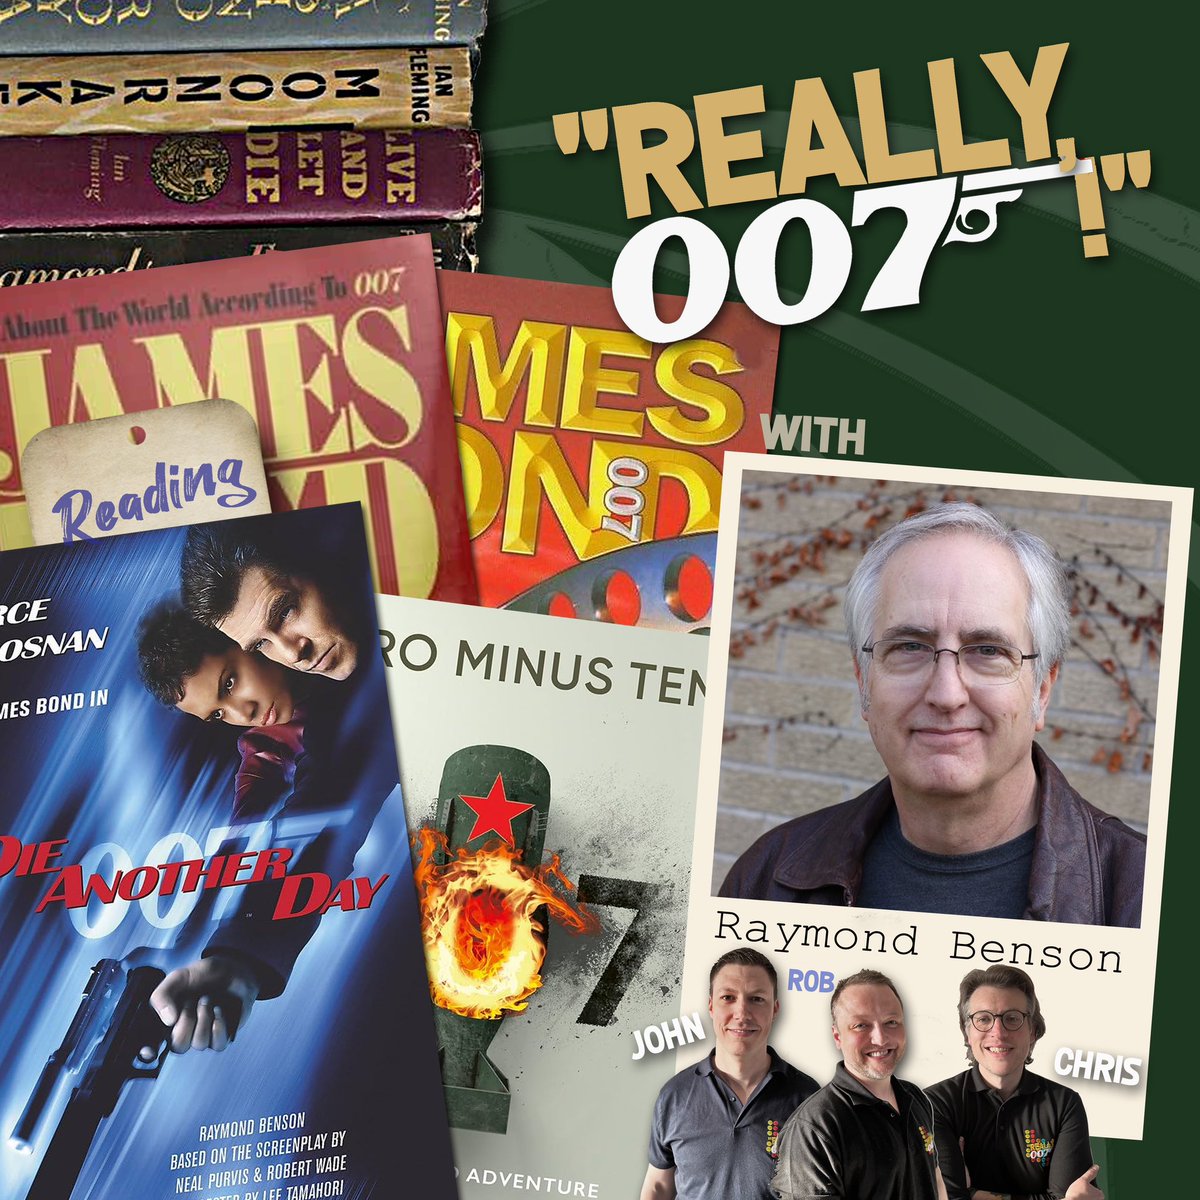 New interview! We chat to author @RaymondBenson about his amazing career - writing loads of #JamesBond books including 3 Pierce Brosnan novelisations! 🎥youtu.be/Q9SBkeVG6Ps?si… 🍎podcasts.apple.com/gb/podcast/rea… 🎧open.spotify.com/episode/3zCXJn…